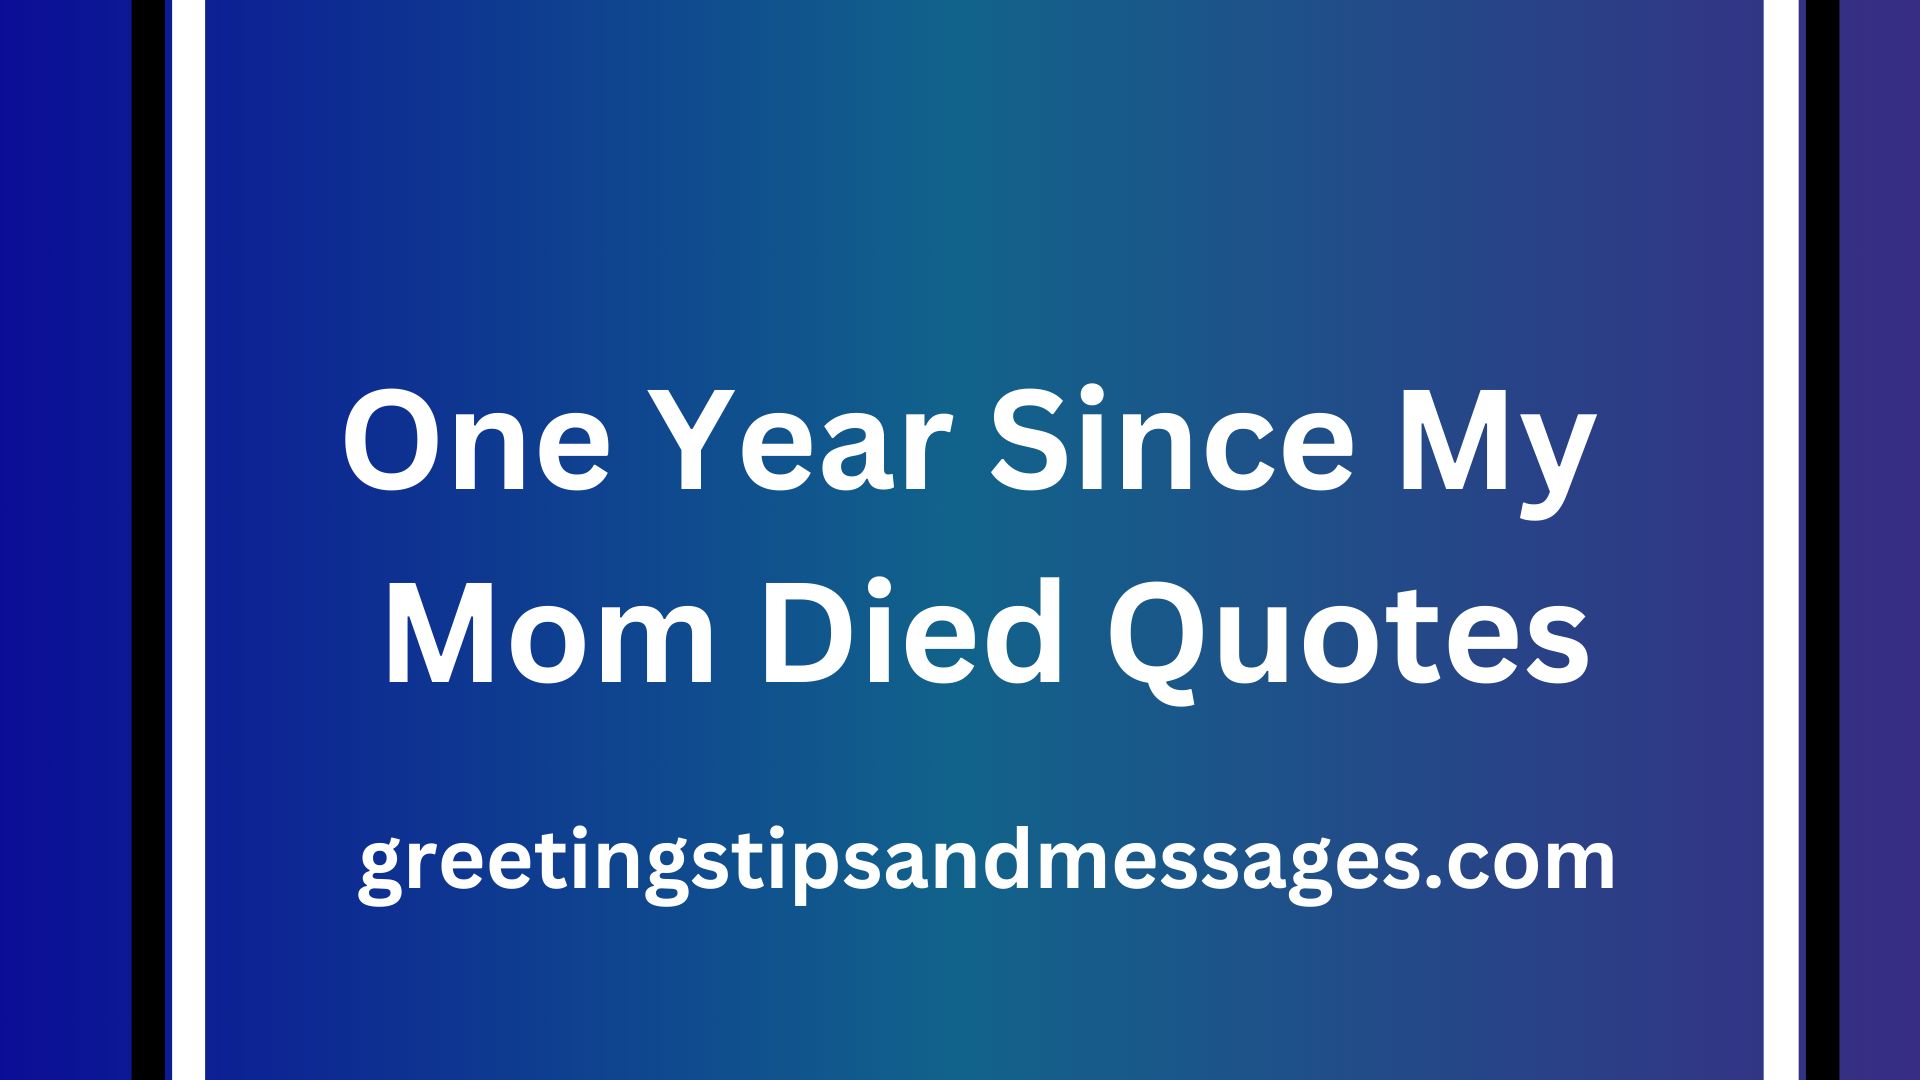 One Year Since My Mom Died Quotes